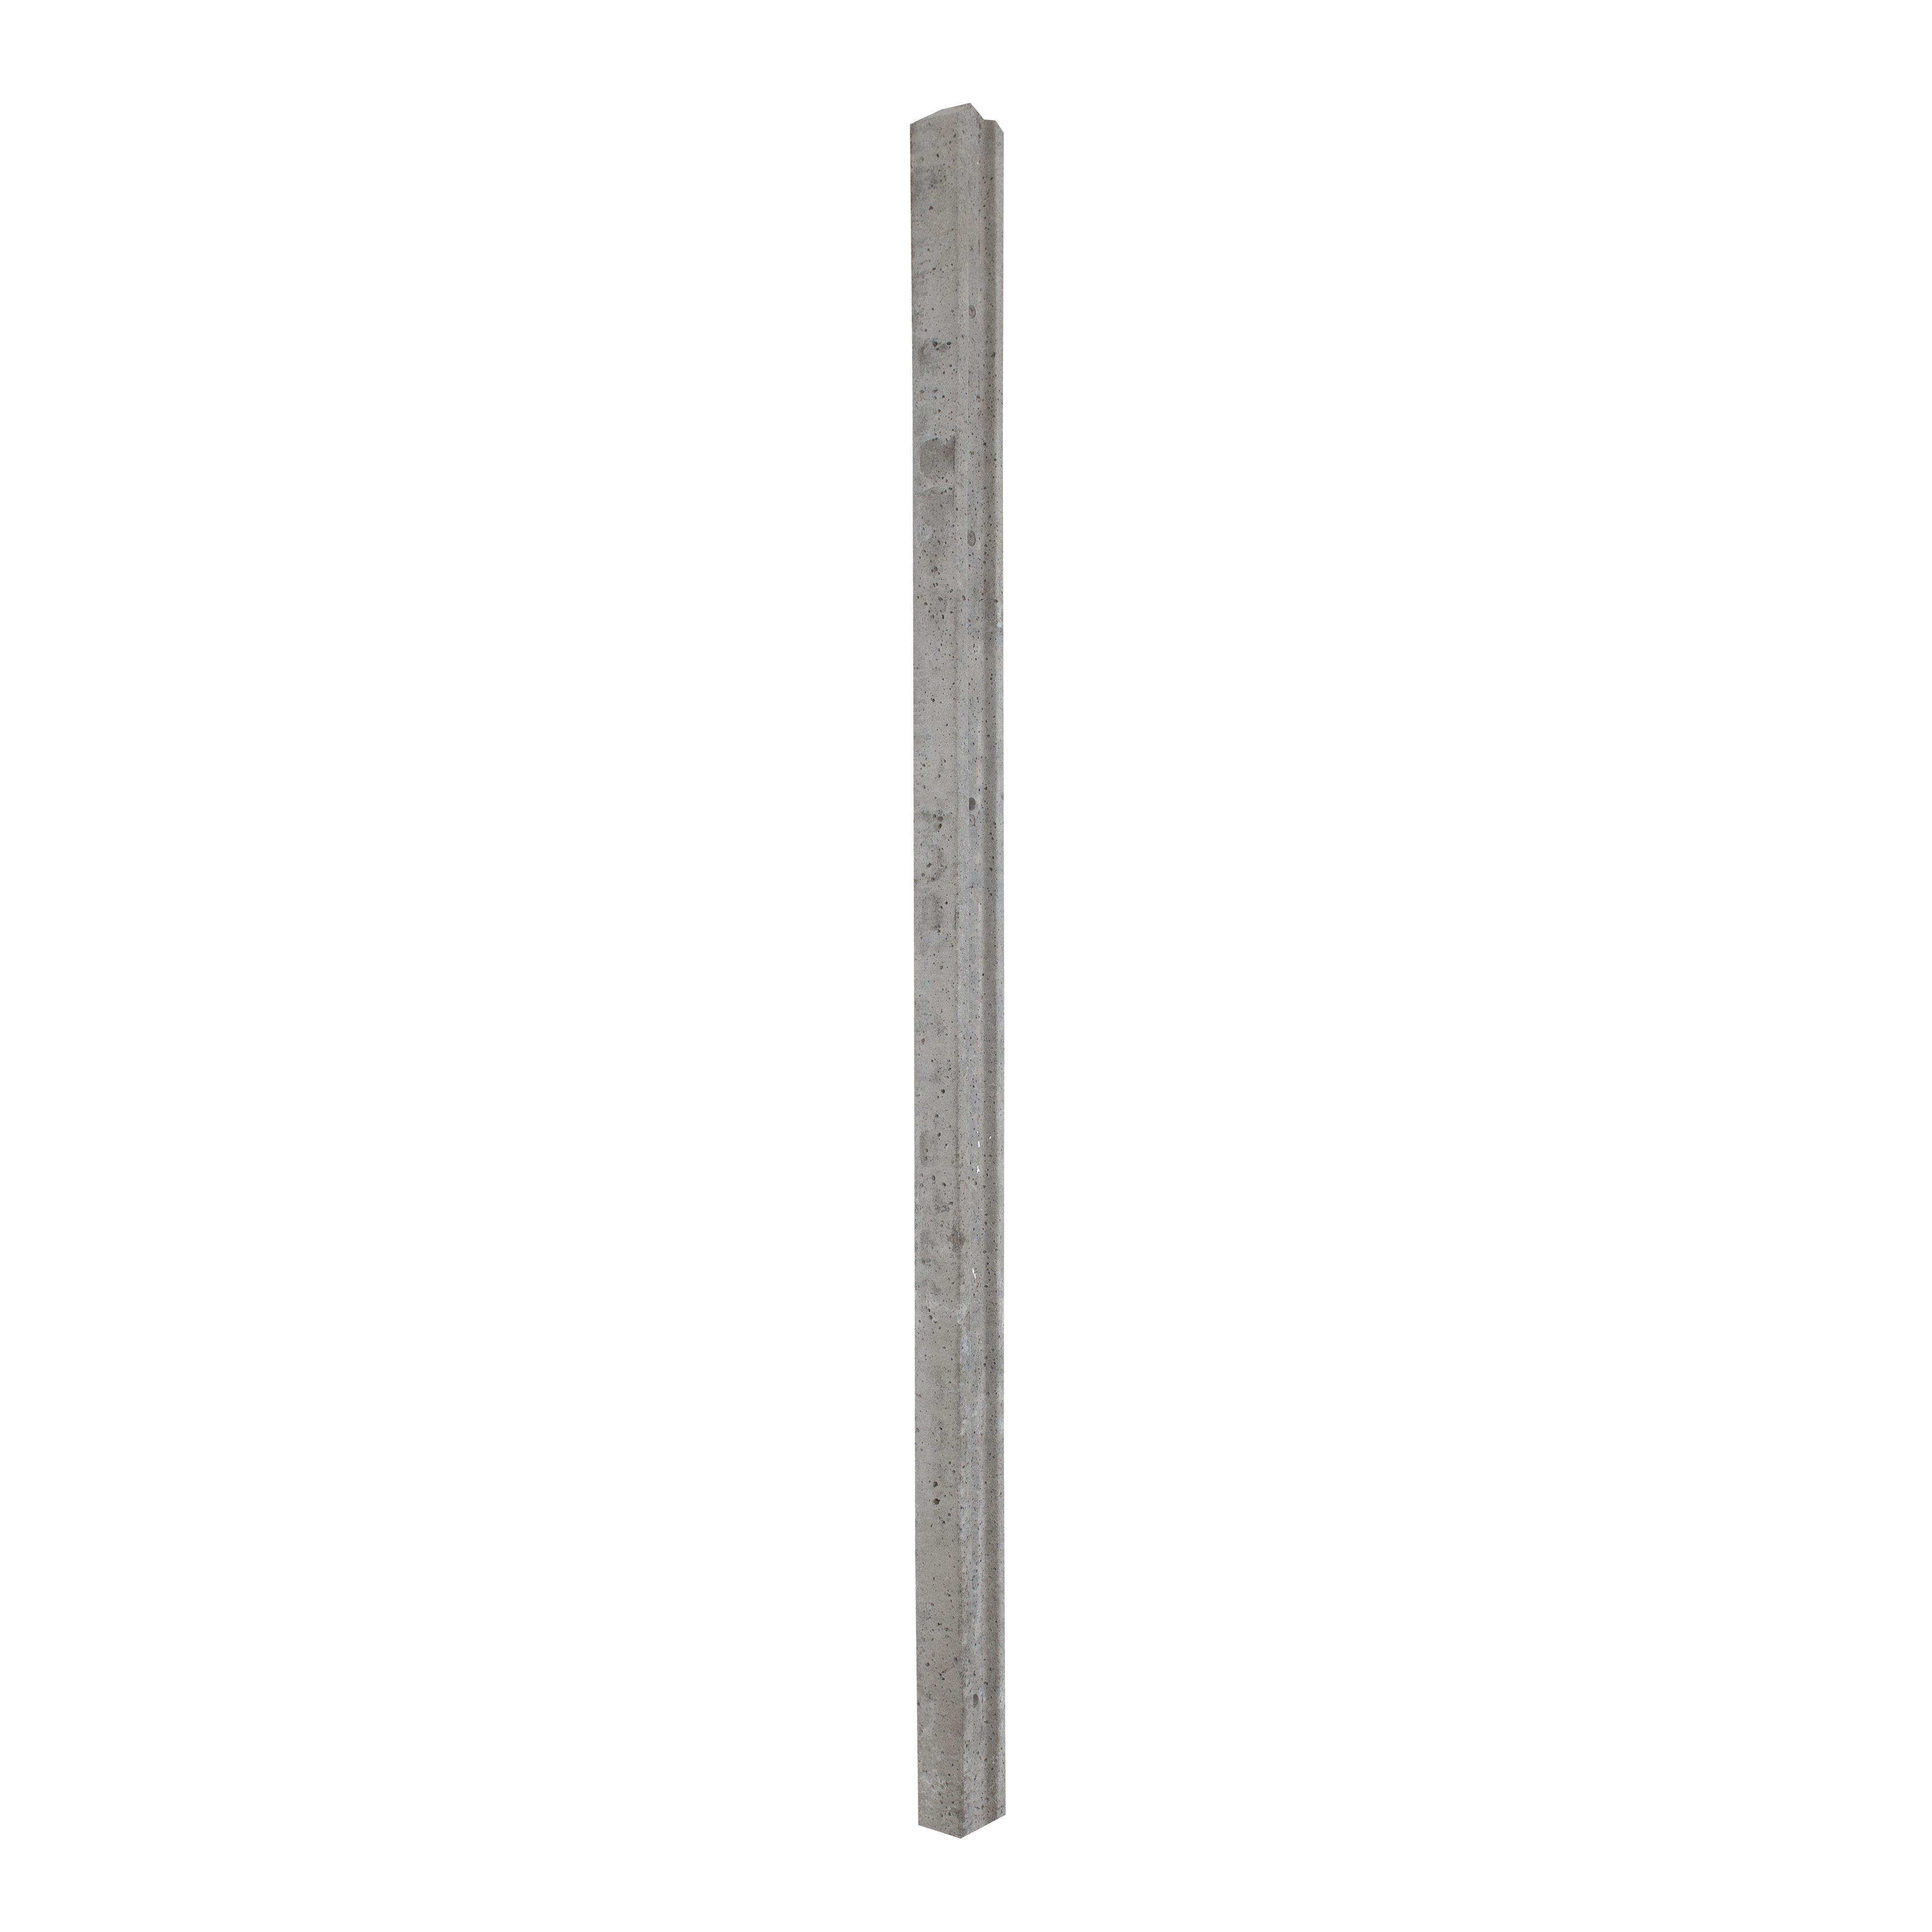 Grey Square Concrete Fence post (H)2.36m (W)85mm, Pack of 3